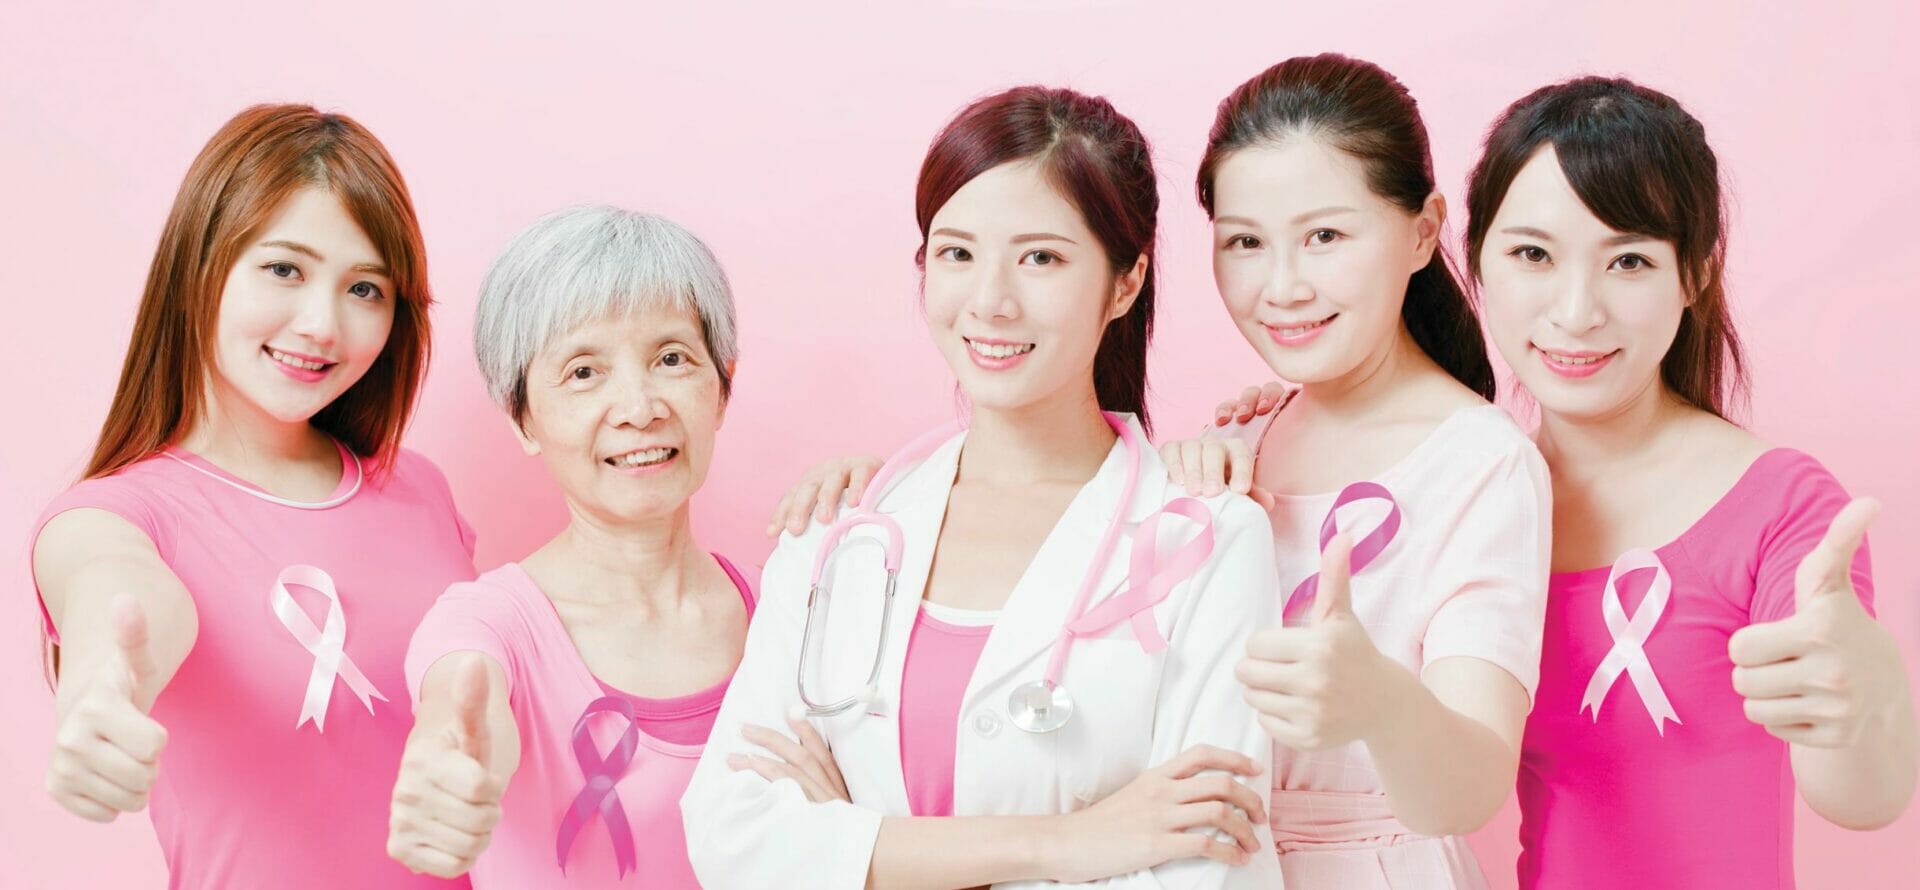 6 FACTS about Breast Cancer All Should Know